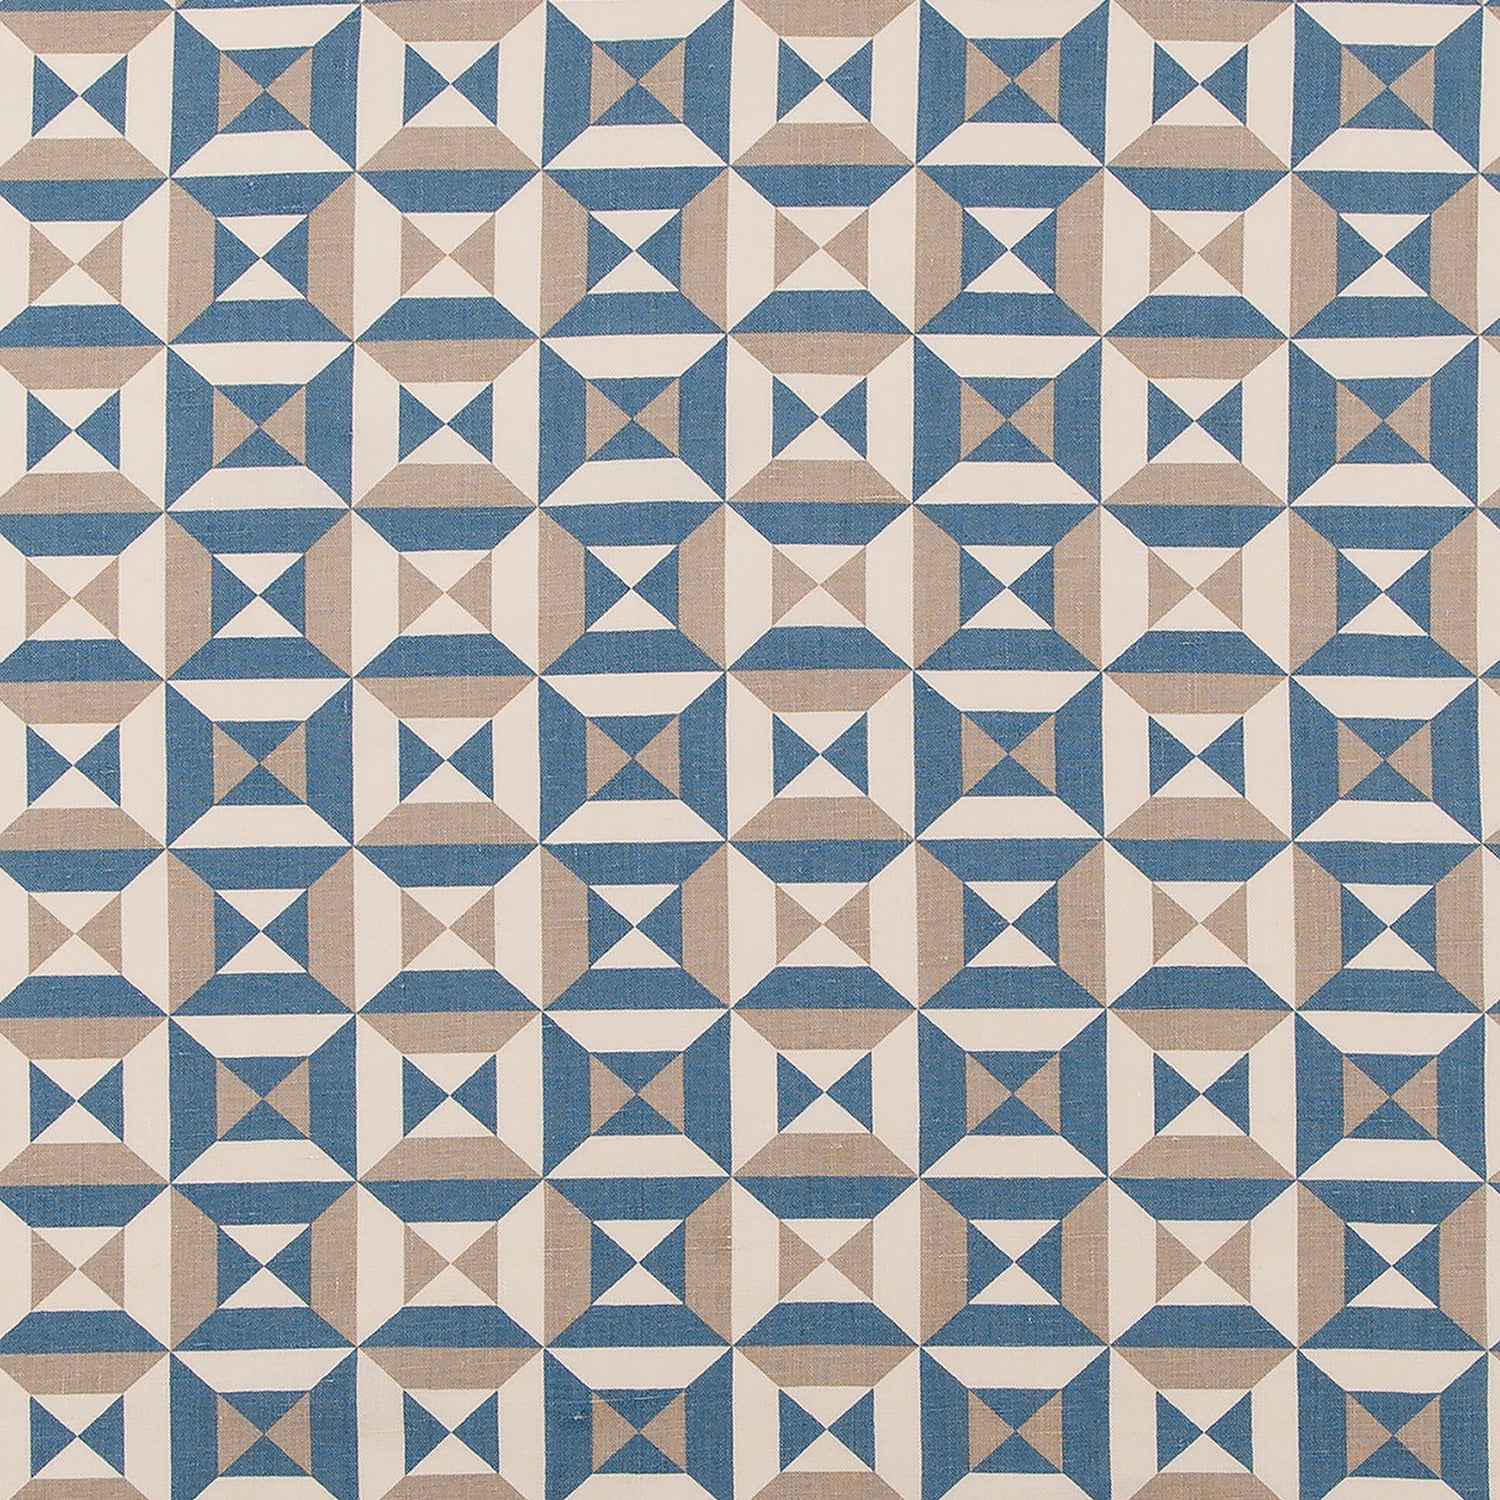 Fabric in a geometric grid print in cream, tan and navy.